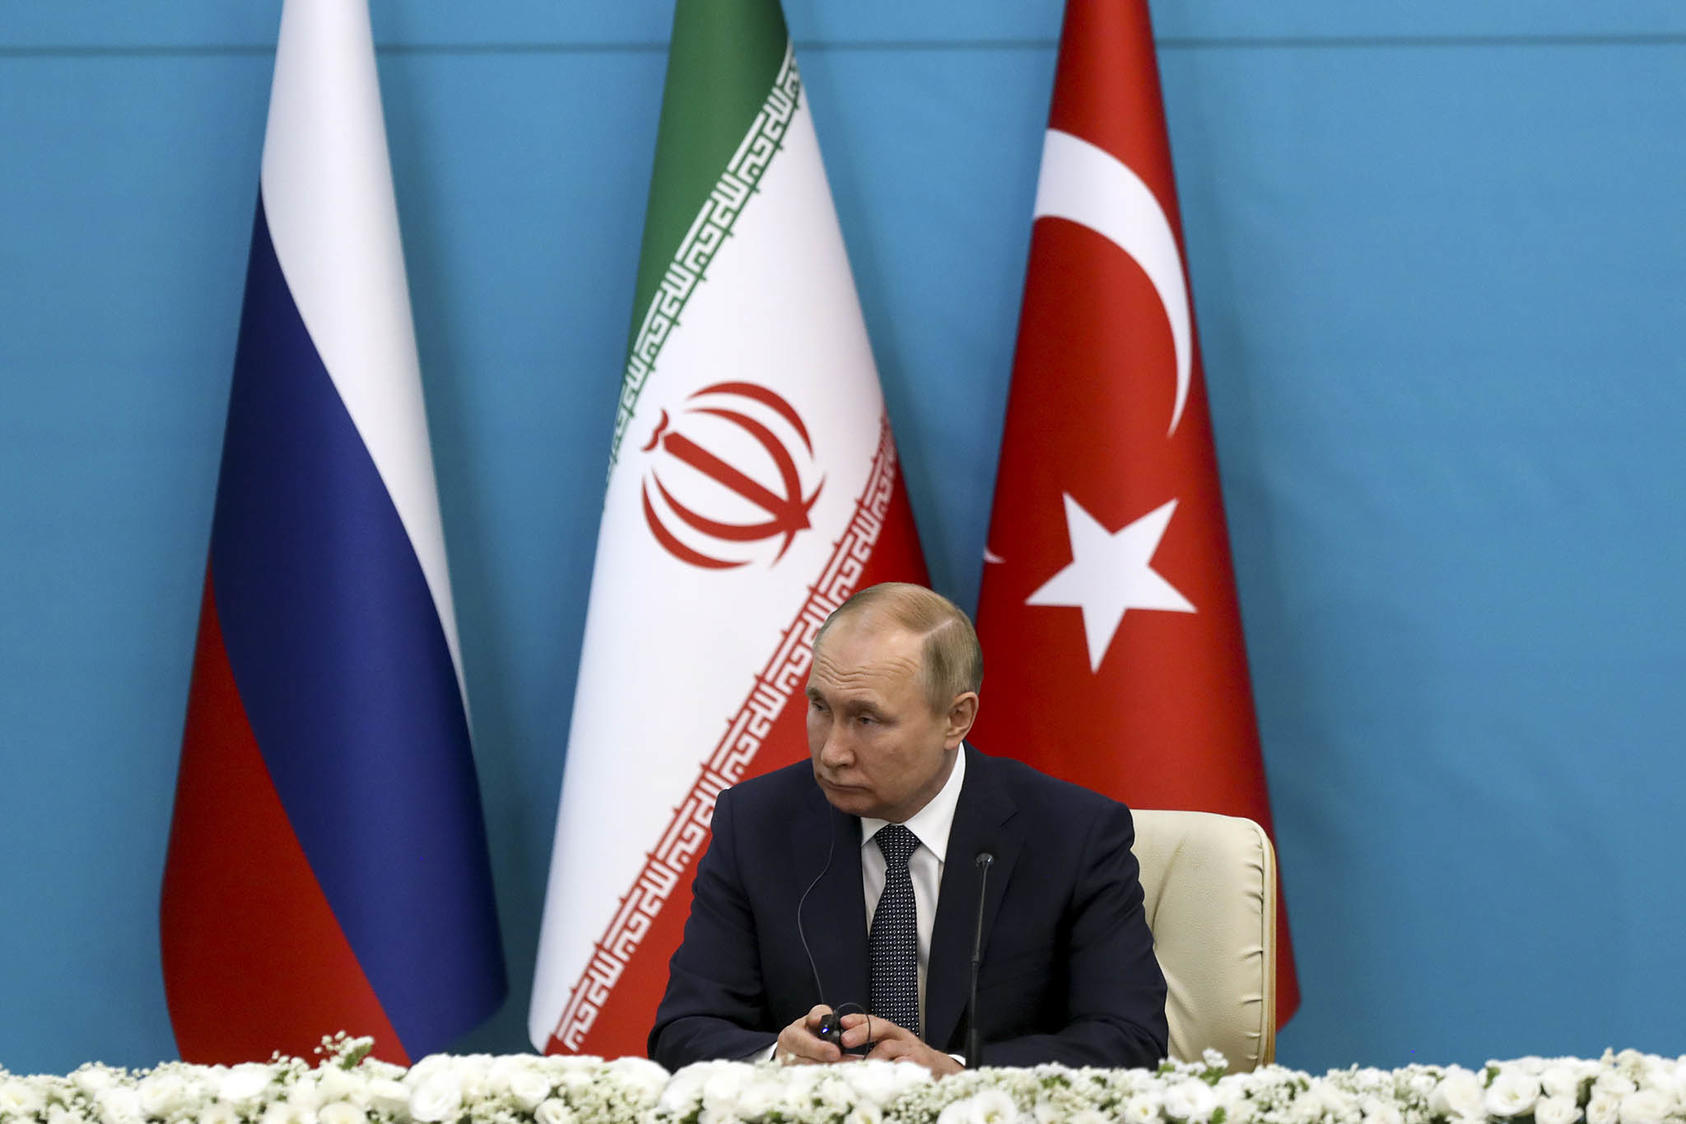 Russian President Vladimir Putin in Tehran, Iran on July 20, 2022. A new foreign policy concept demonstrates Russia’s escalating campaign to define a new world order (Arash Khamooshi/The New York Times)